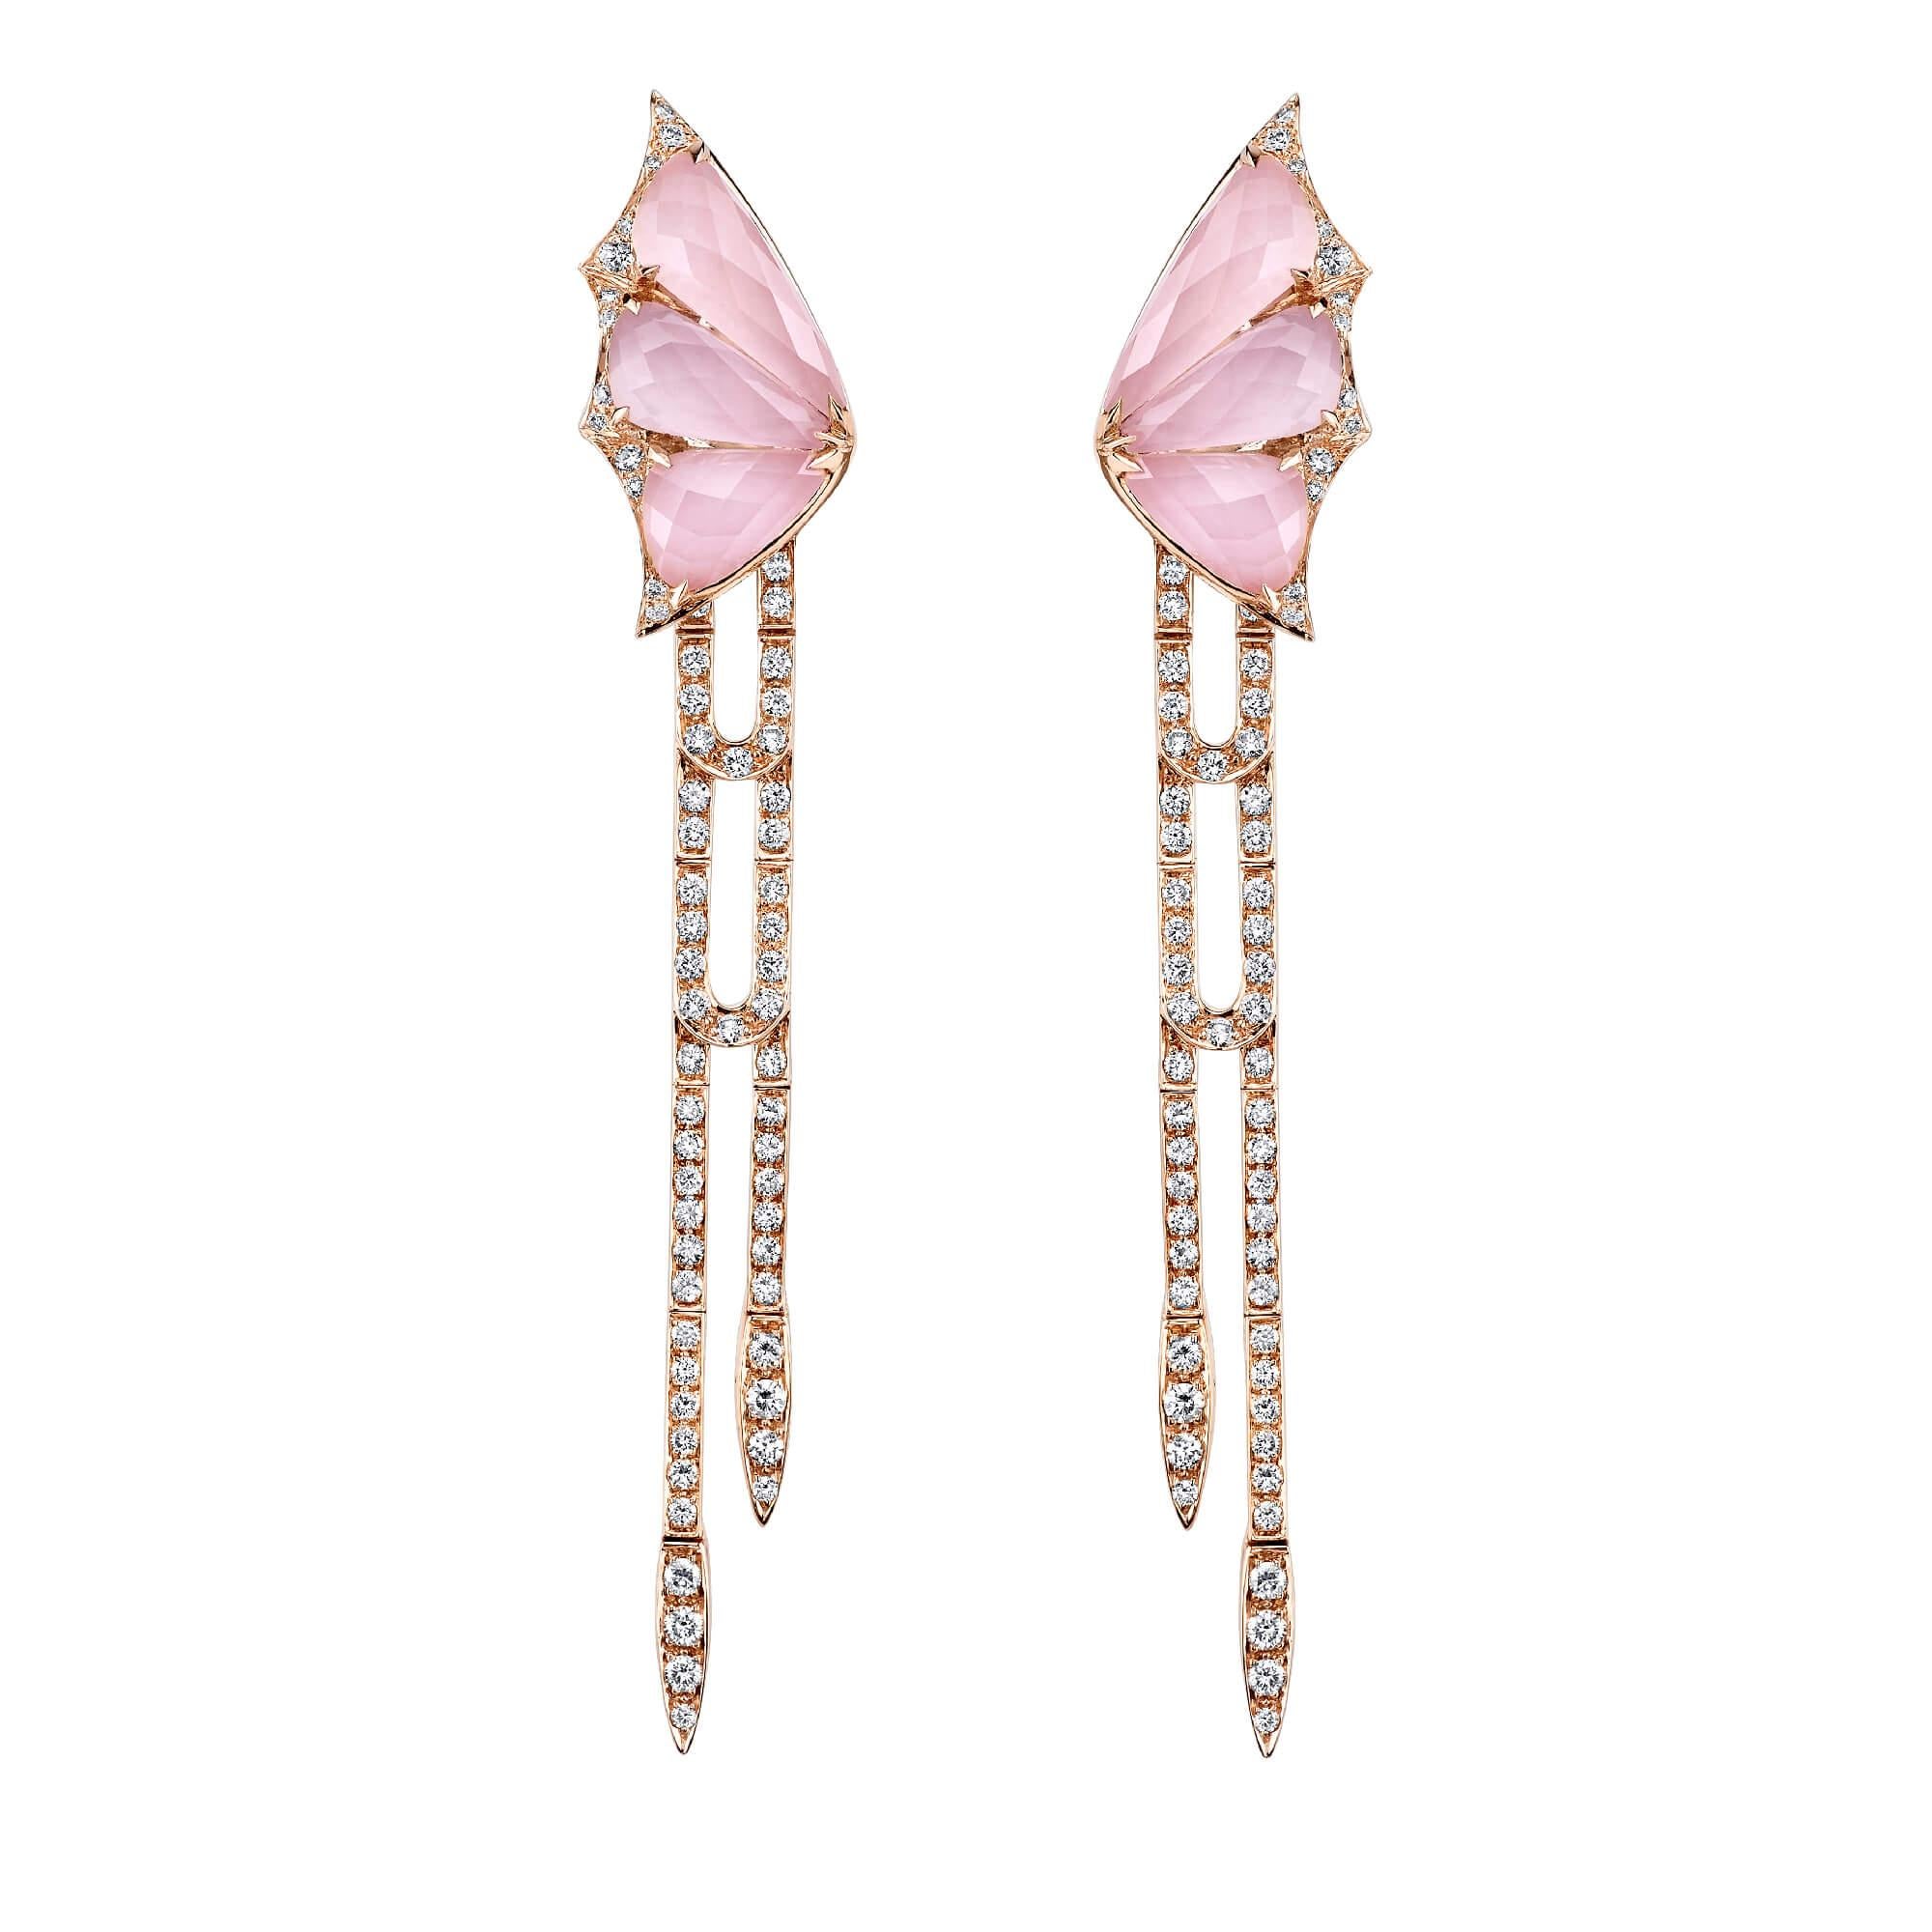 Stephen Webster Fly by Night Pink Opal Crystal Haze and White Diamond Earrings